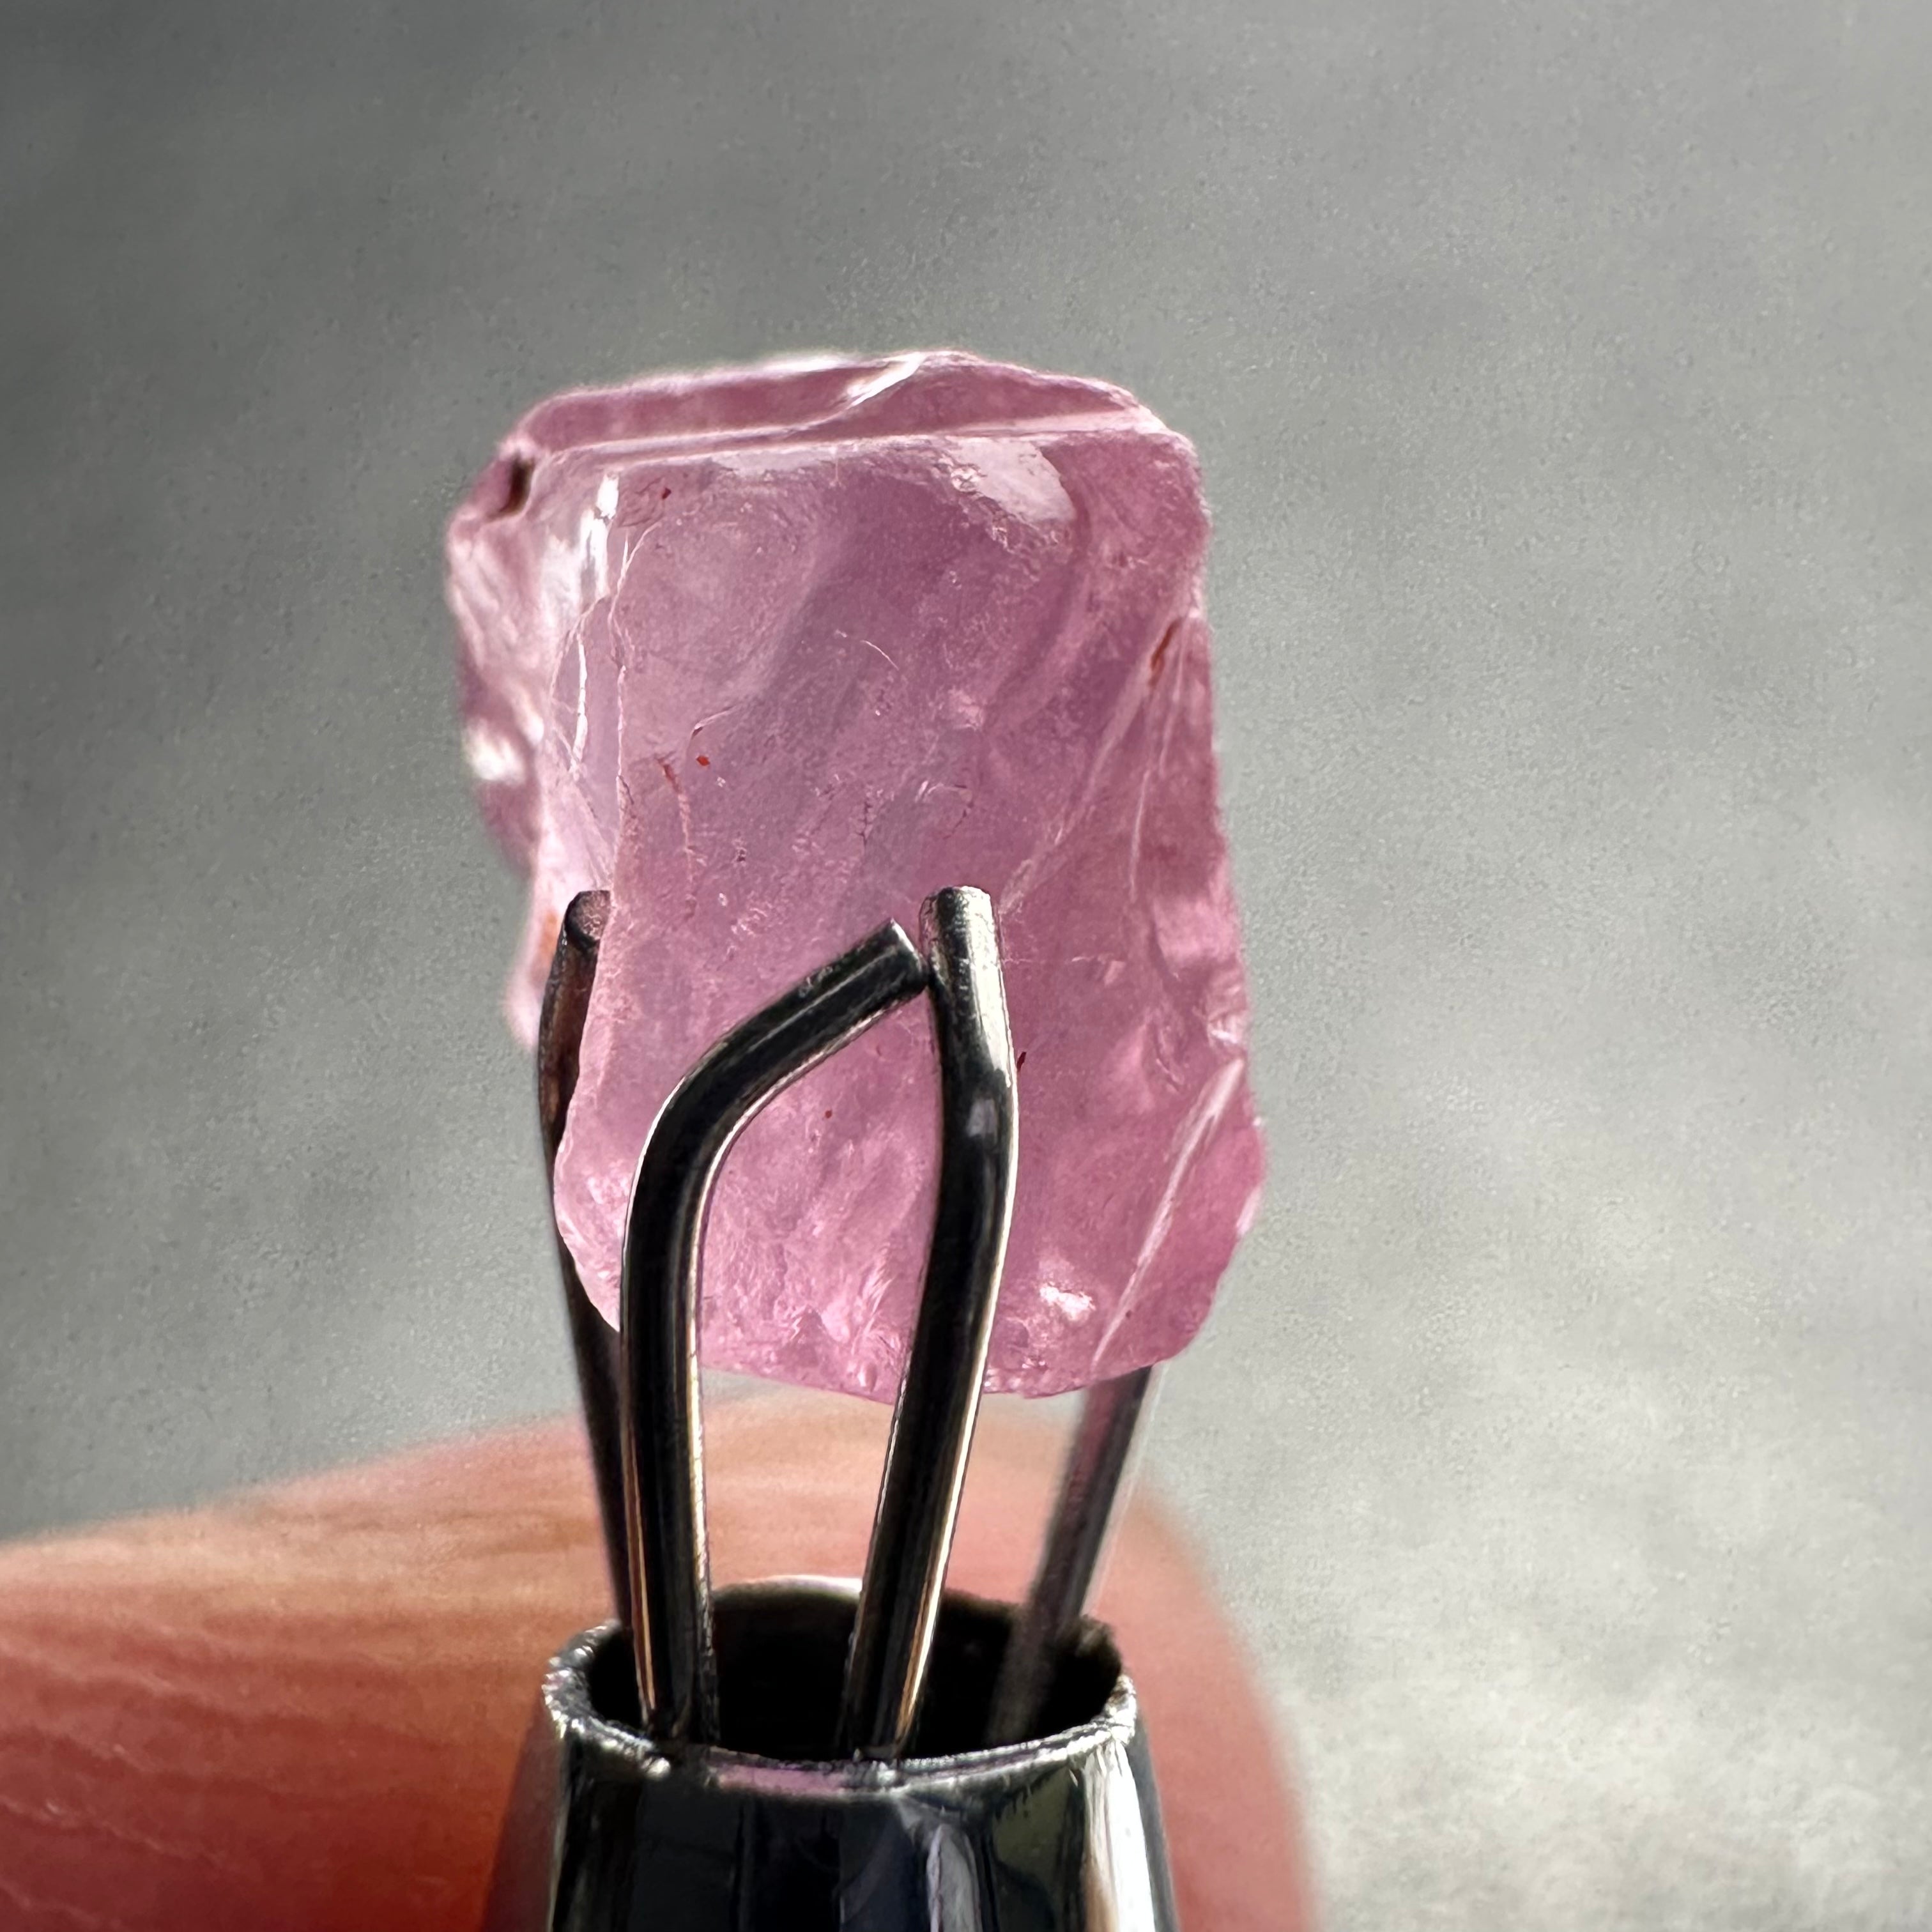 1.78Ct Pink Spinel Tanzania Vvs + Slightly Silky Untreated Unheated